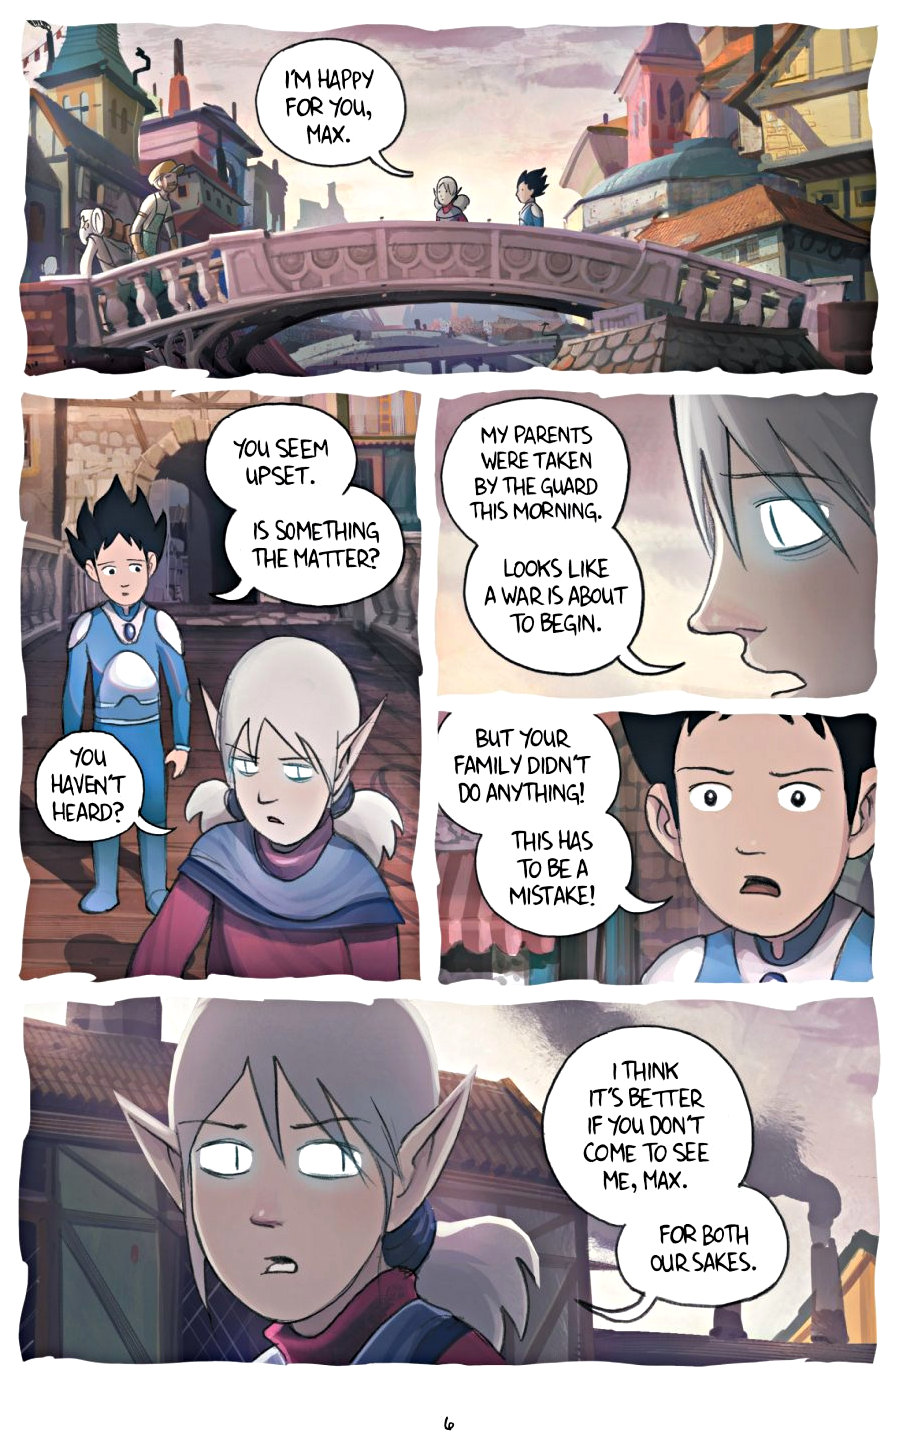 page 6 of amulet 5 prince of the elves graphic novel